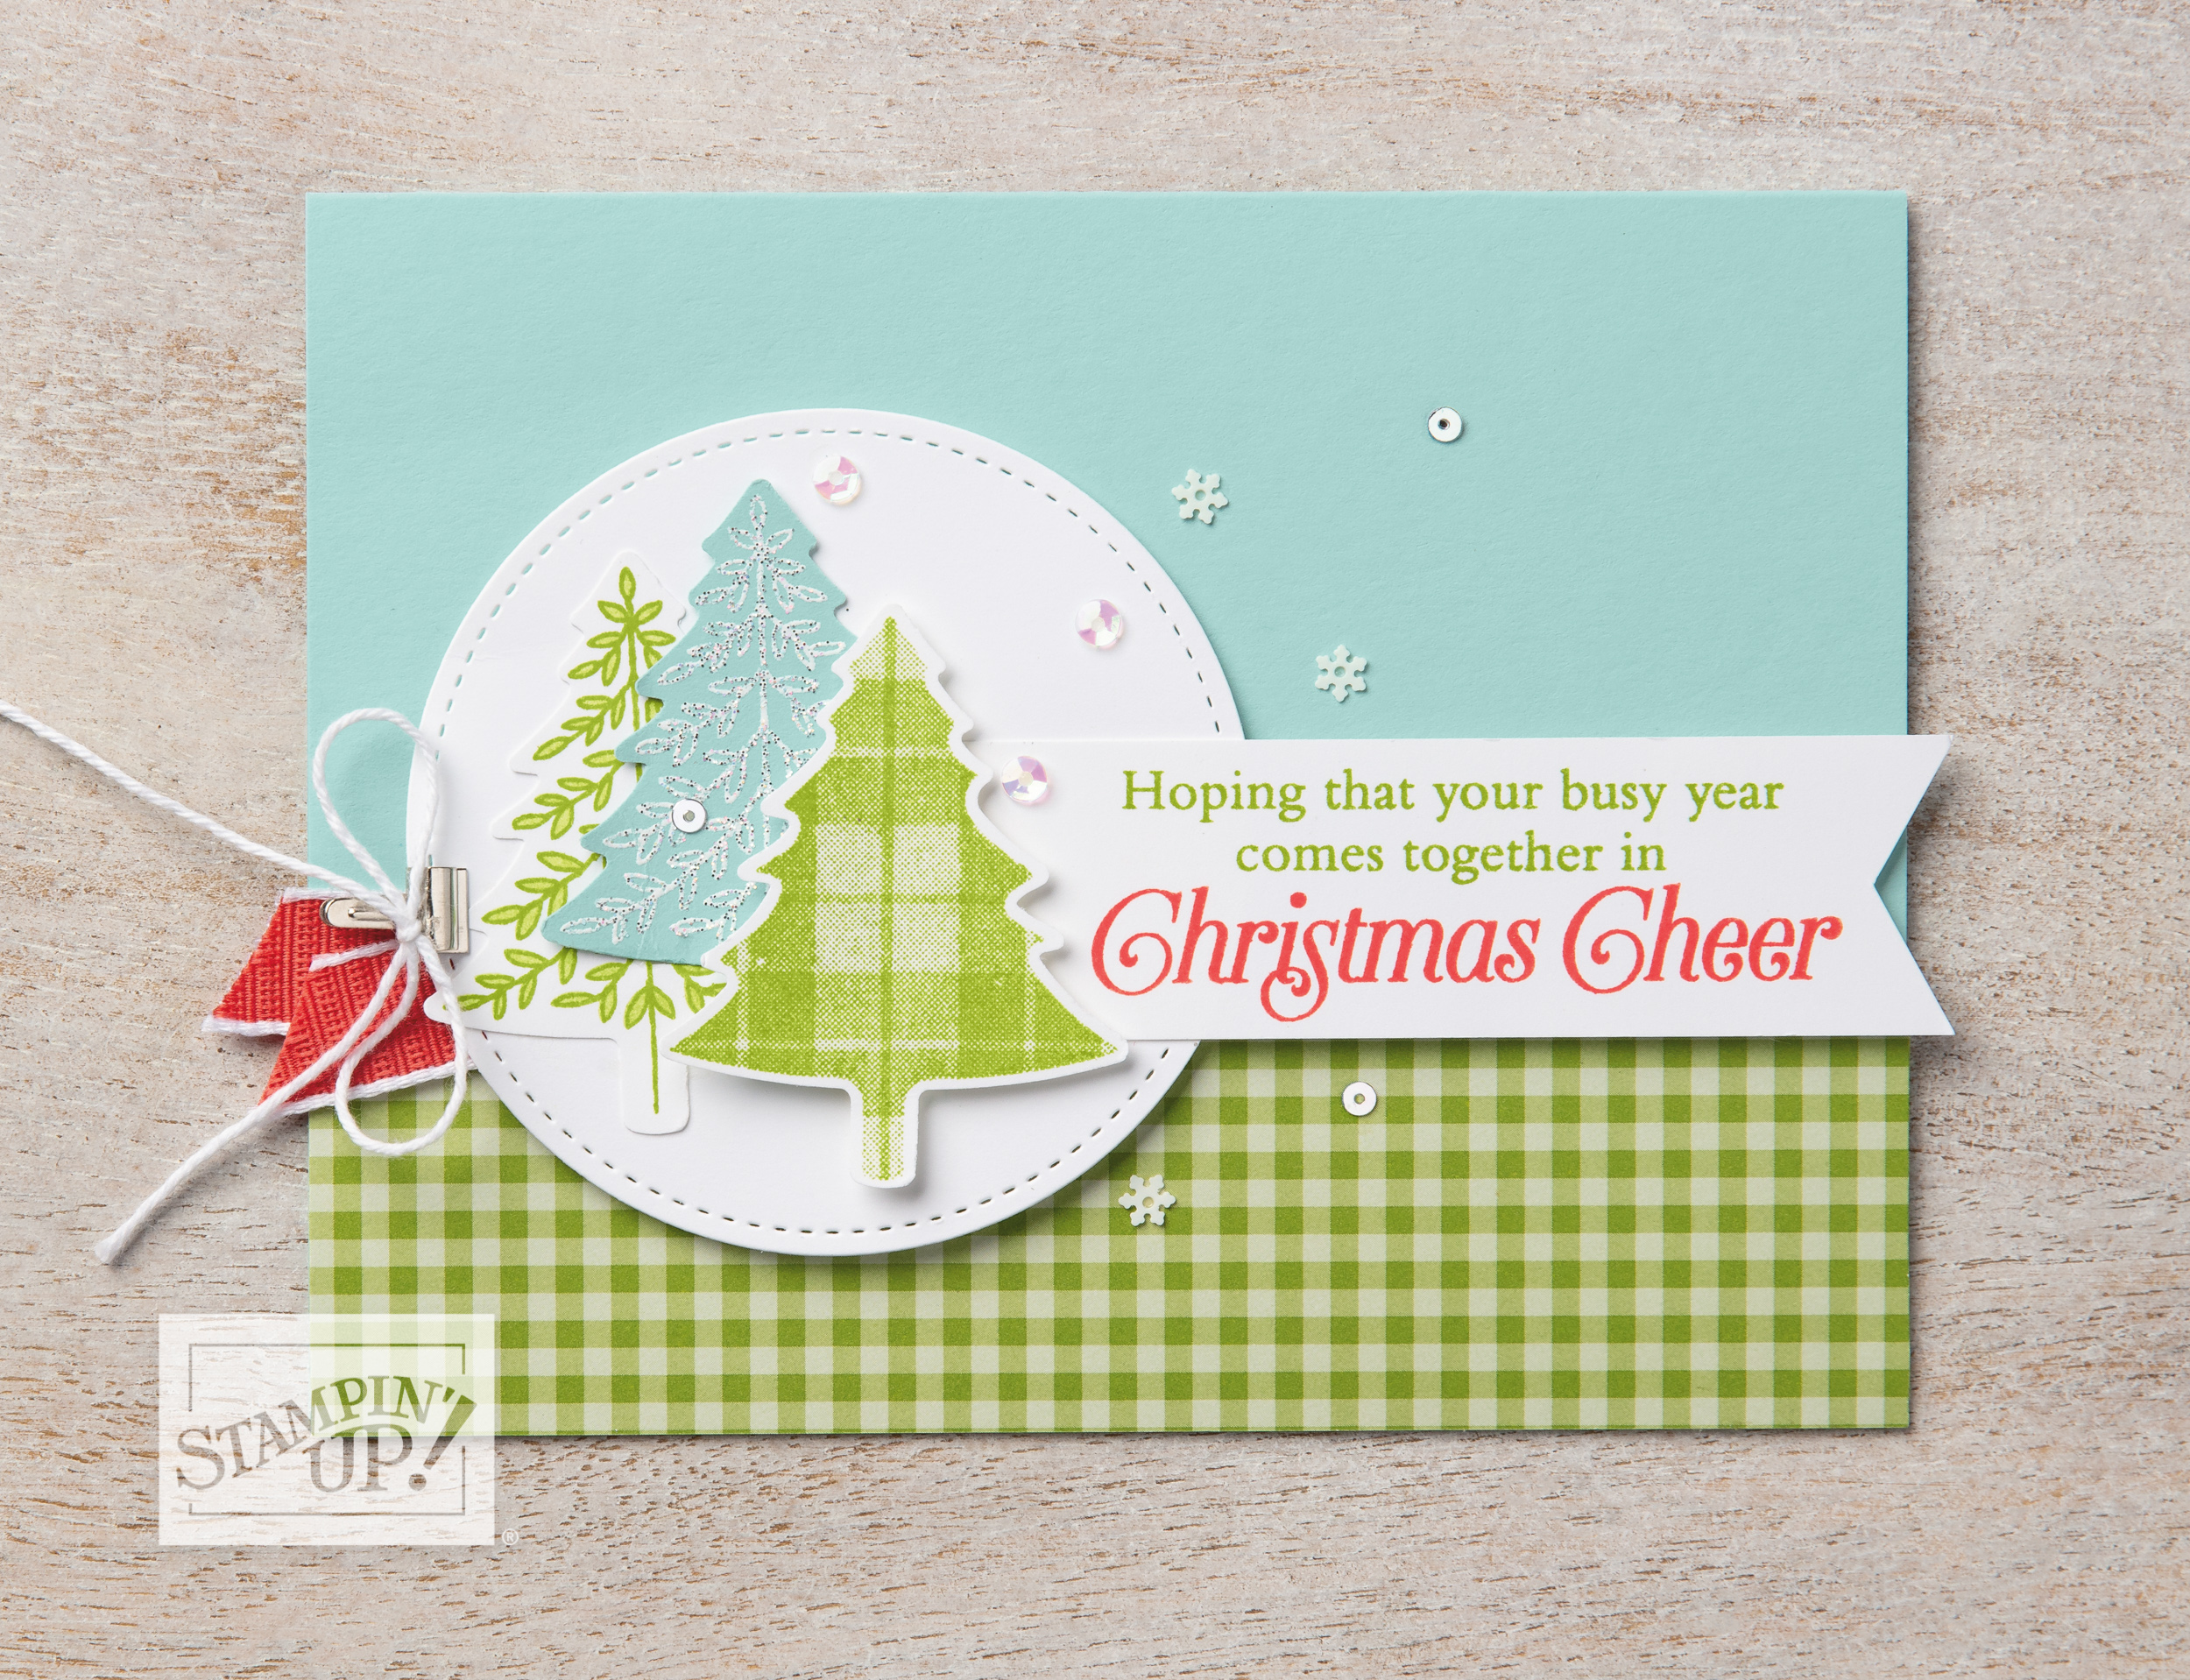 Stampin' Up! Perfectly Plaid Stamp Set and Pine Tree Punch Christmas card idea - For imore inspiration and ordering information, visit juststampin.com - Jeanie Stark StampinUp